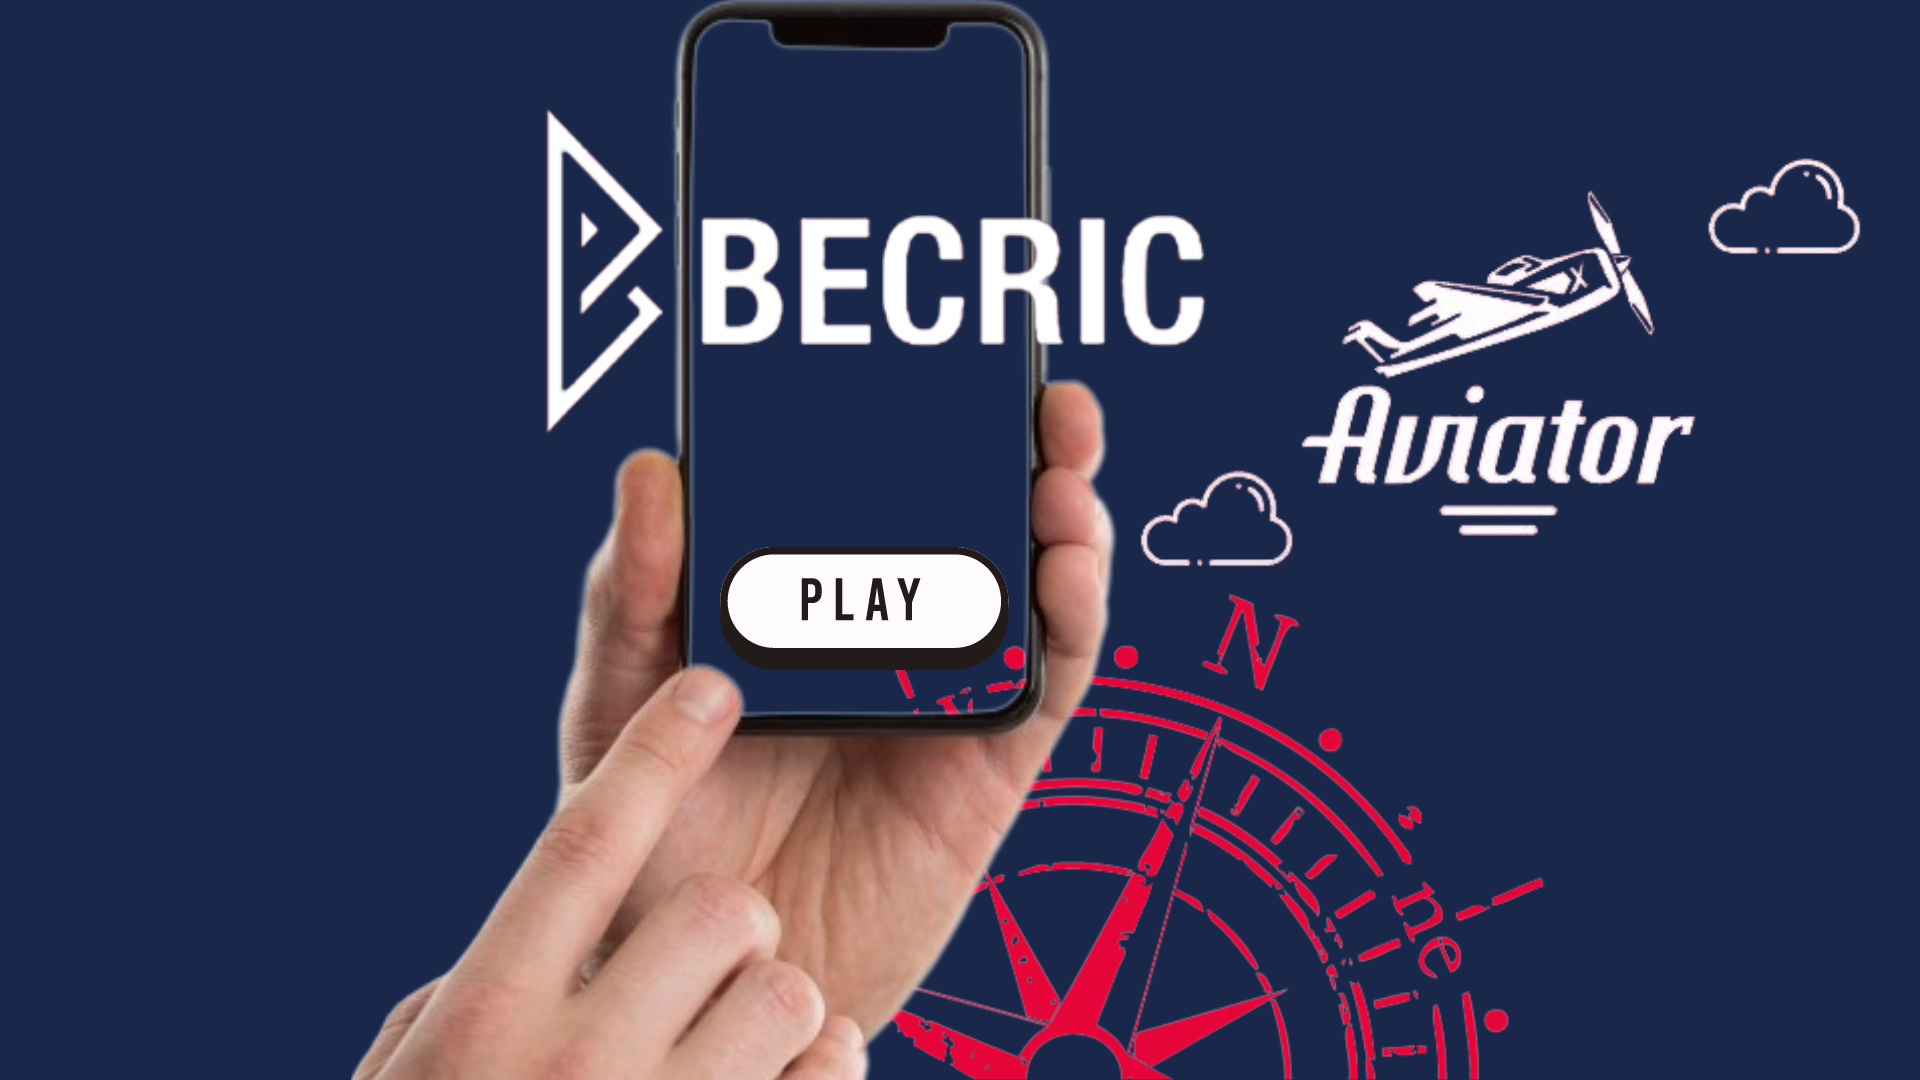 A hand holding the phone with Becric logo on it and Aviator app logo